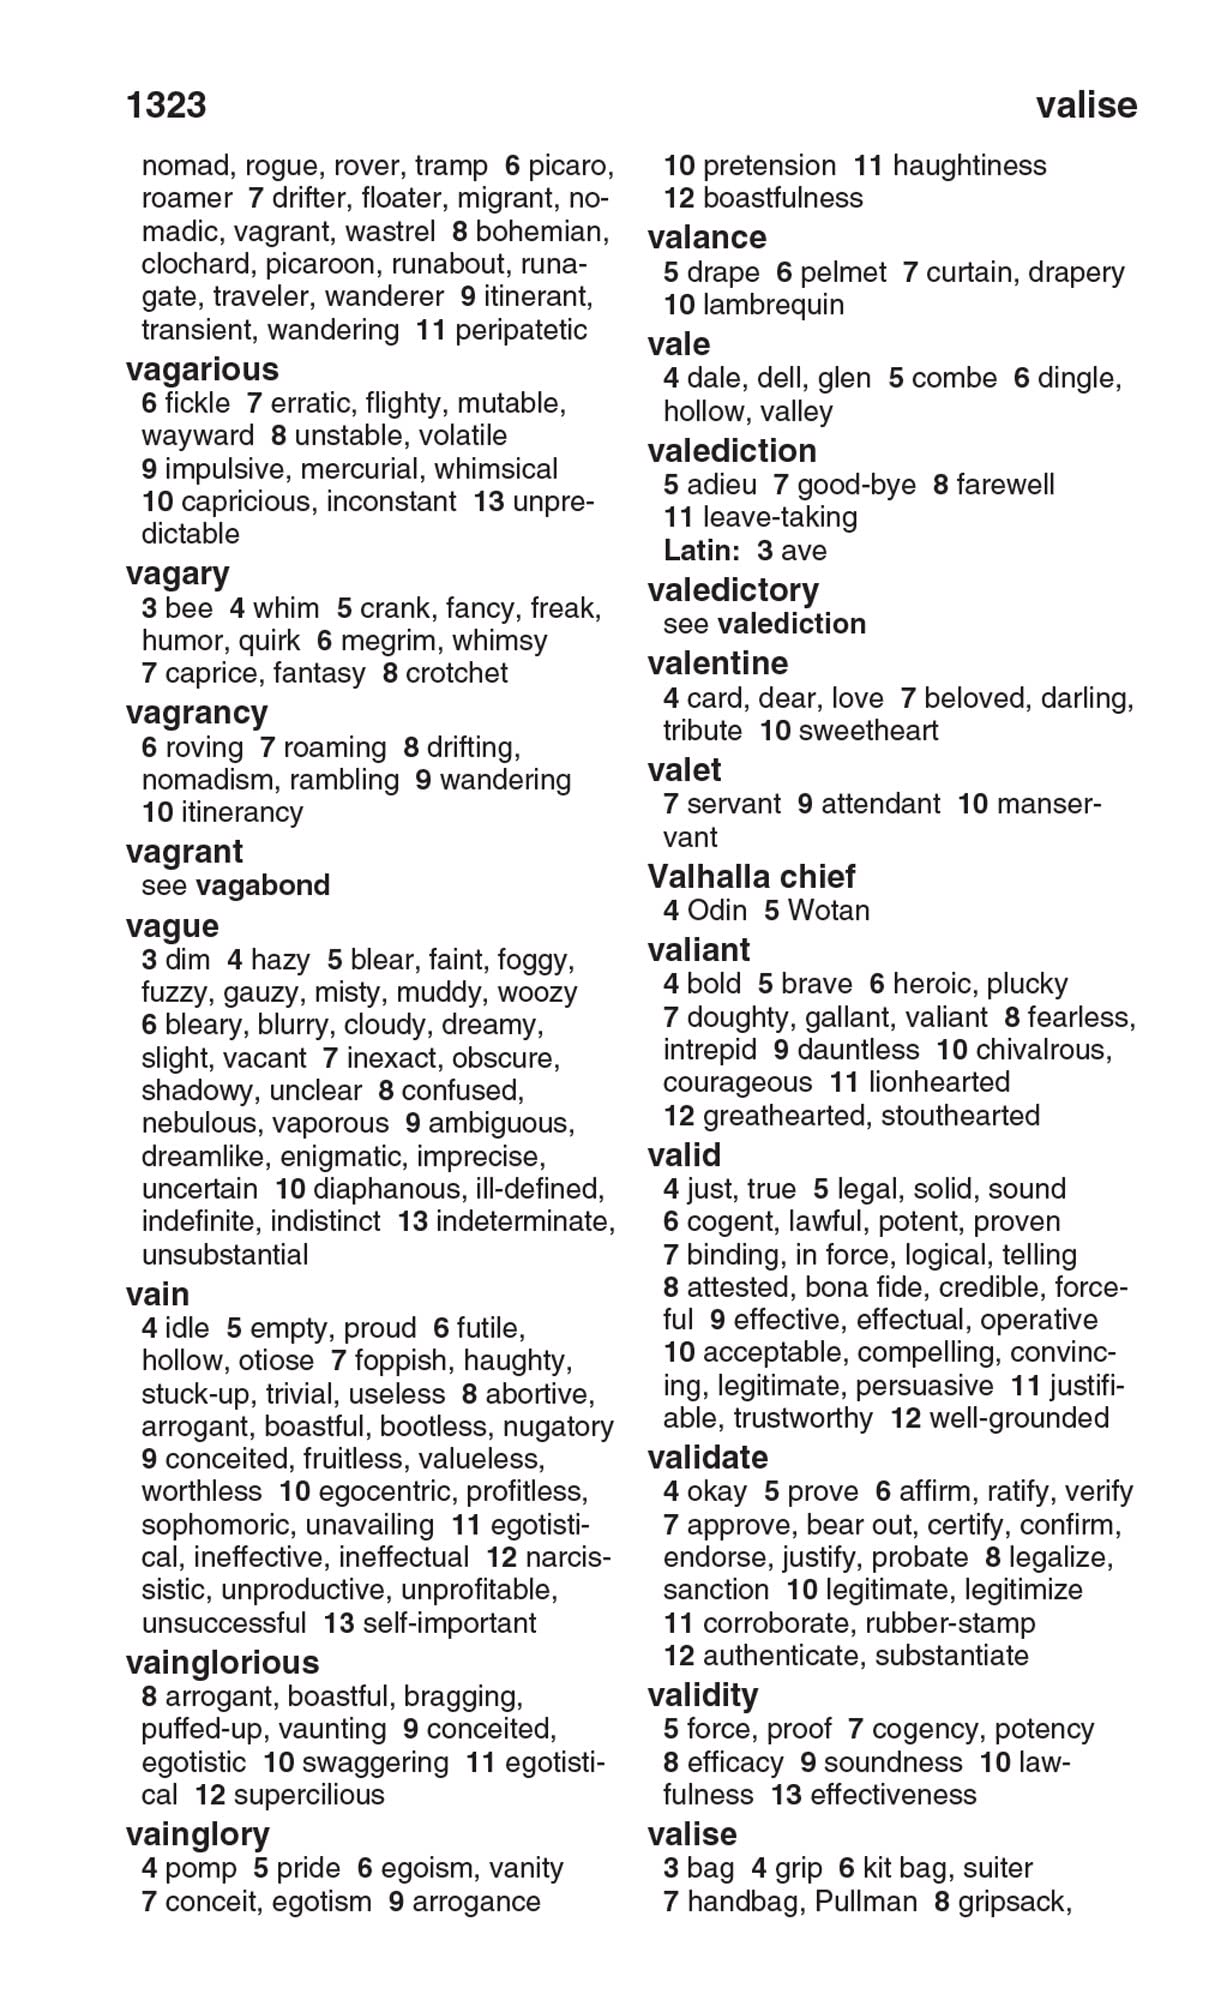 Merriam-Webster's Crossword Puzzle Dictionary (Edition 4) (Paperback) - image 3 of 5